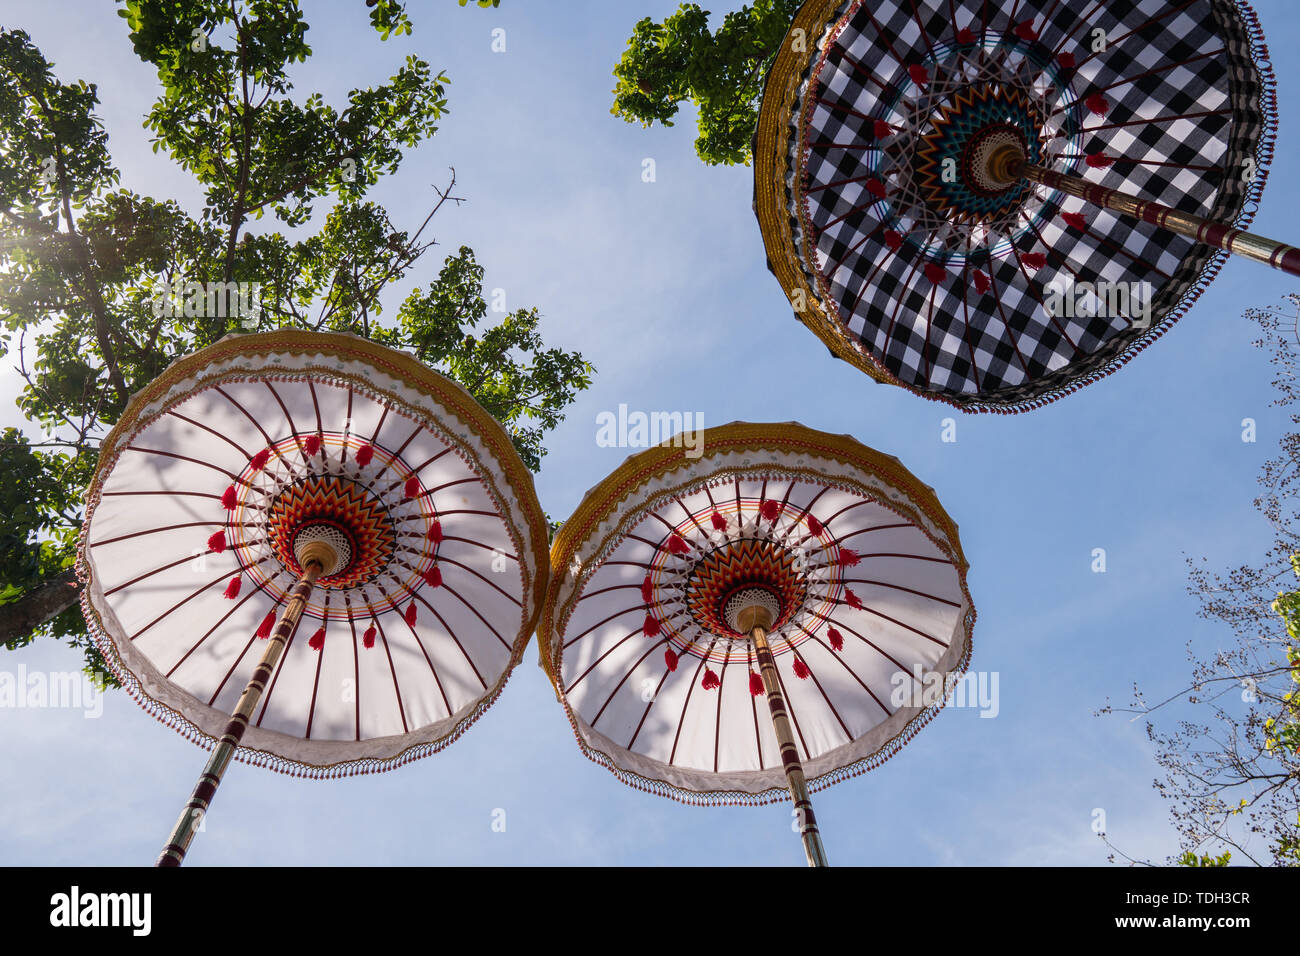 Group of colorful Balinese umbrellas at celebration ceremony in Hindu temple. Traditional design, white and checkered pattern under the tree Stock Photo